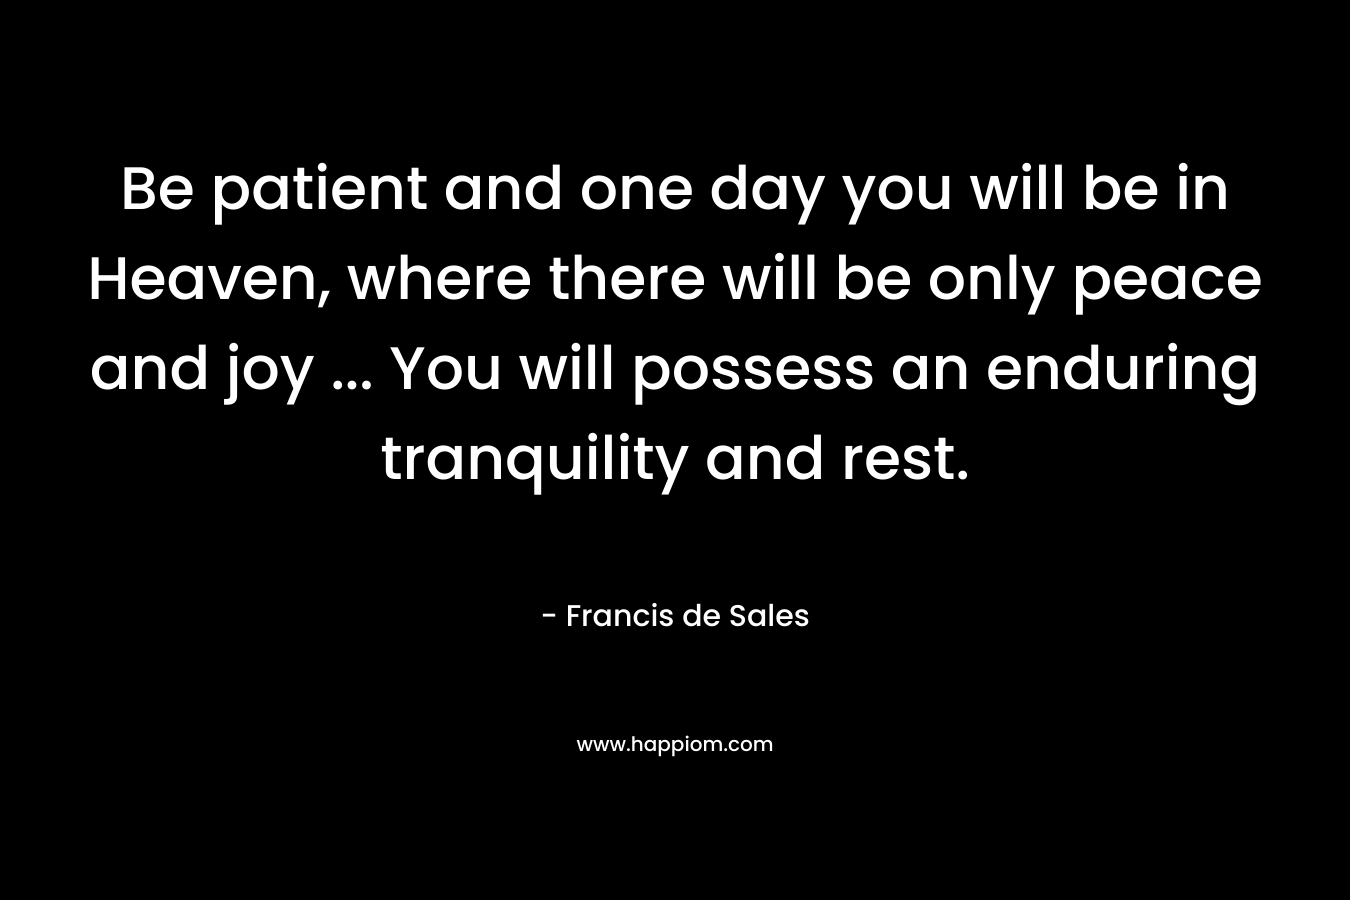 Be patient and one day you will be in Heaven, where there will be only peace and joy ... You will possess an enduring tranquility and rest.